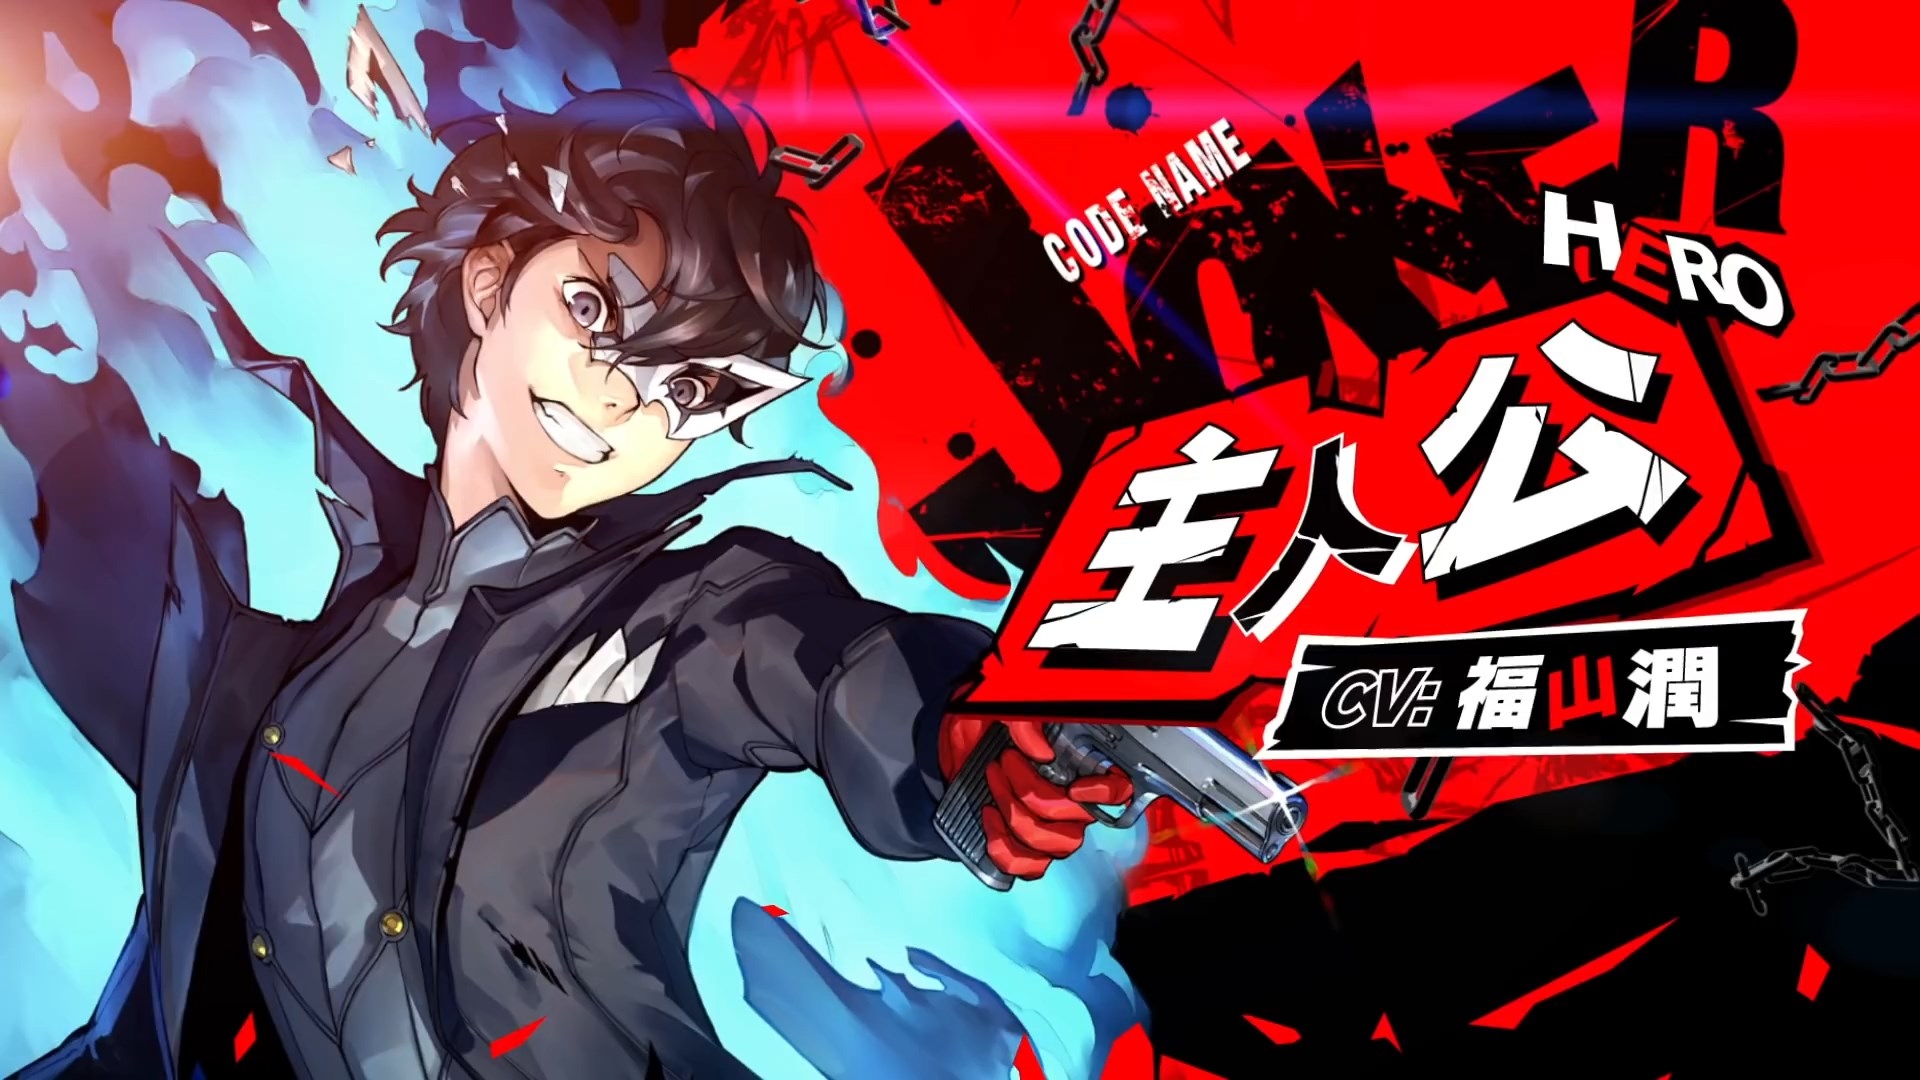 Joker Persona 5 Scramble The Phantom Strikers Wallpaper Hd Games 4k Wallpapers Images Photos And Background Wallpapers Den